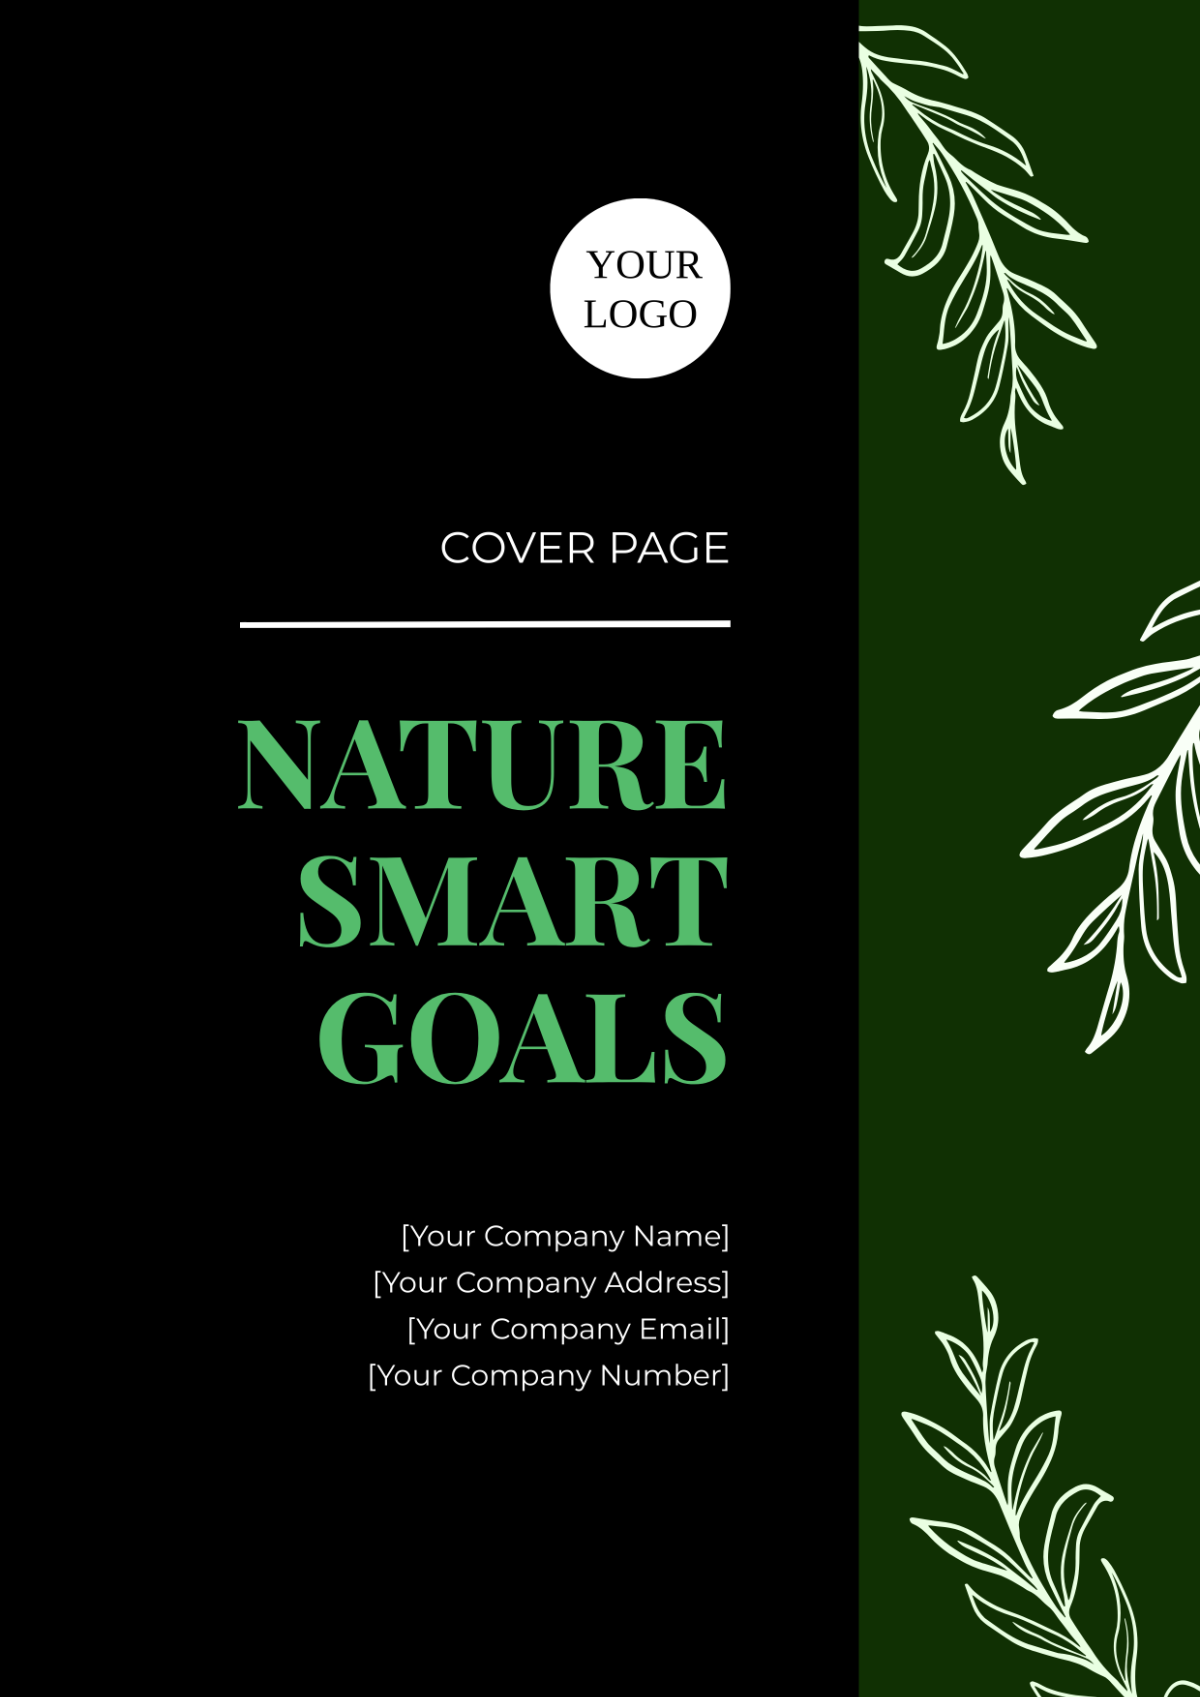 Nature SMART Goals Cover Page